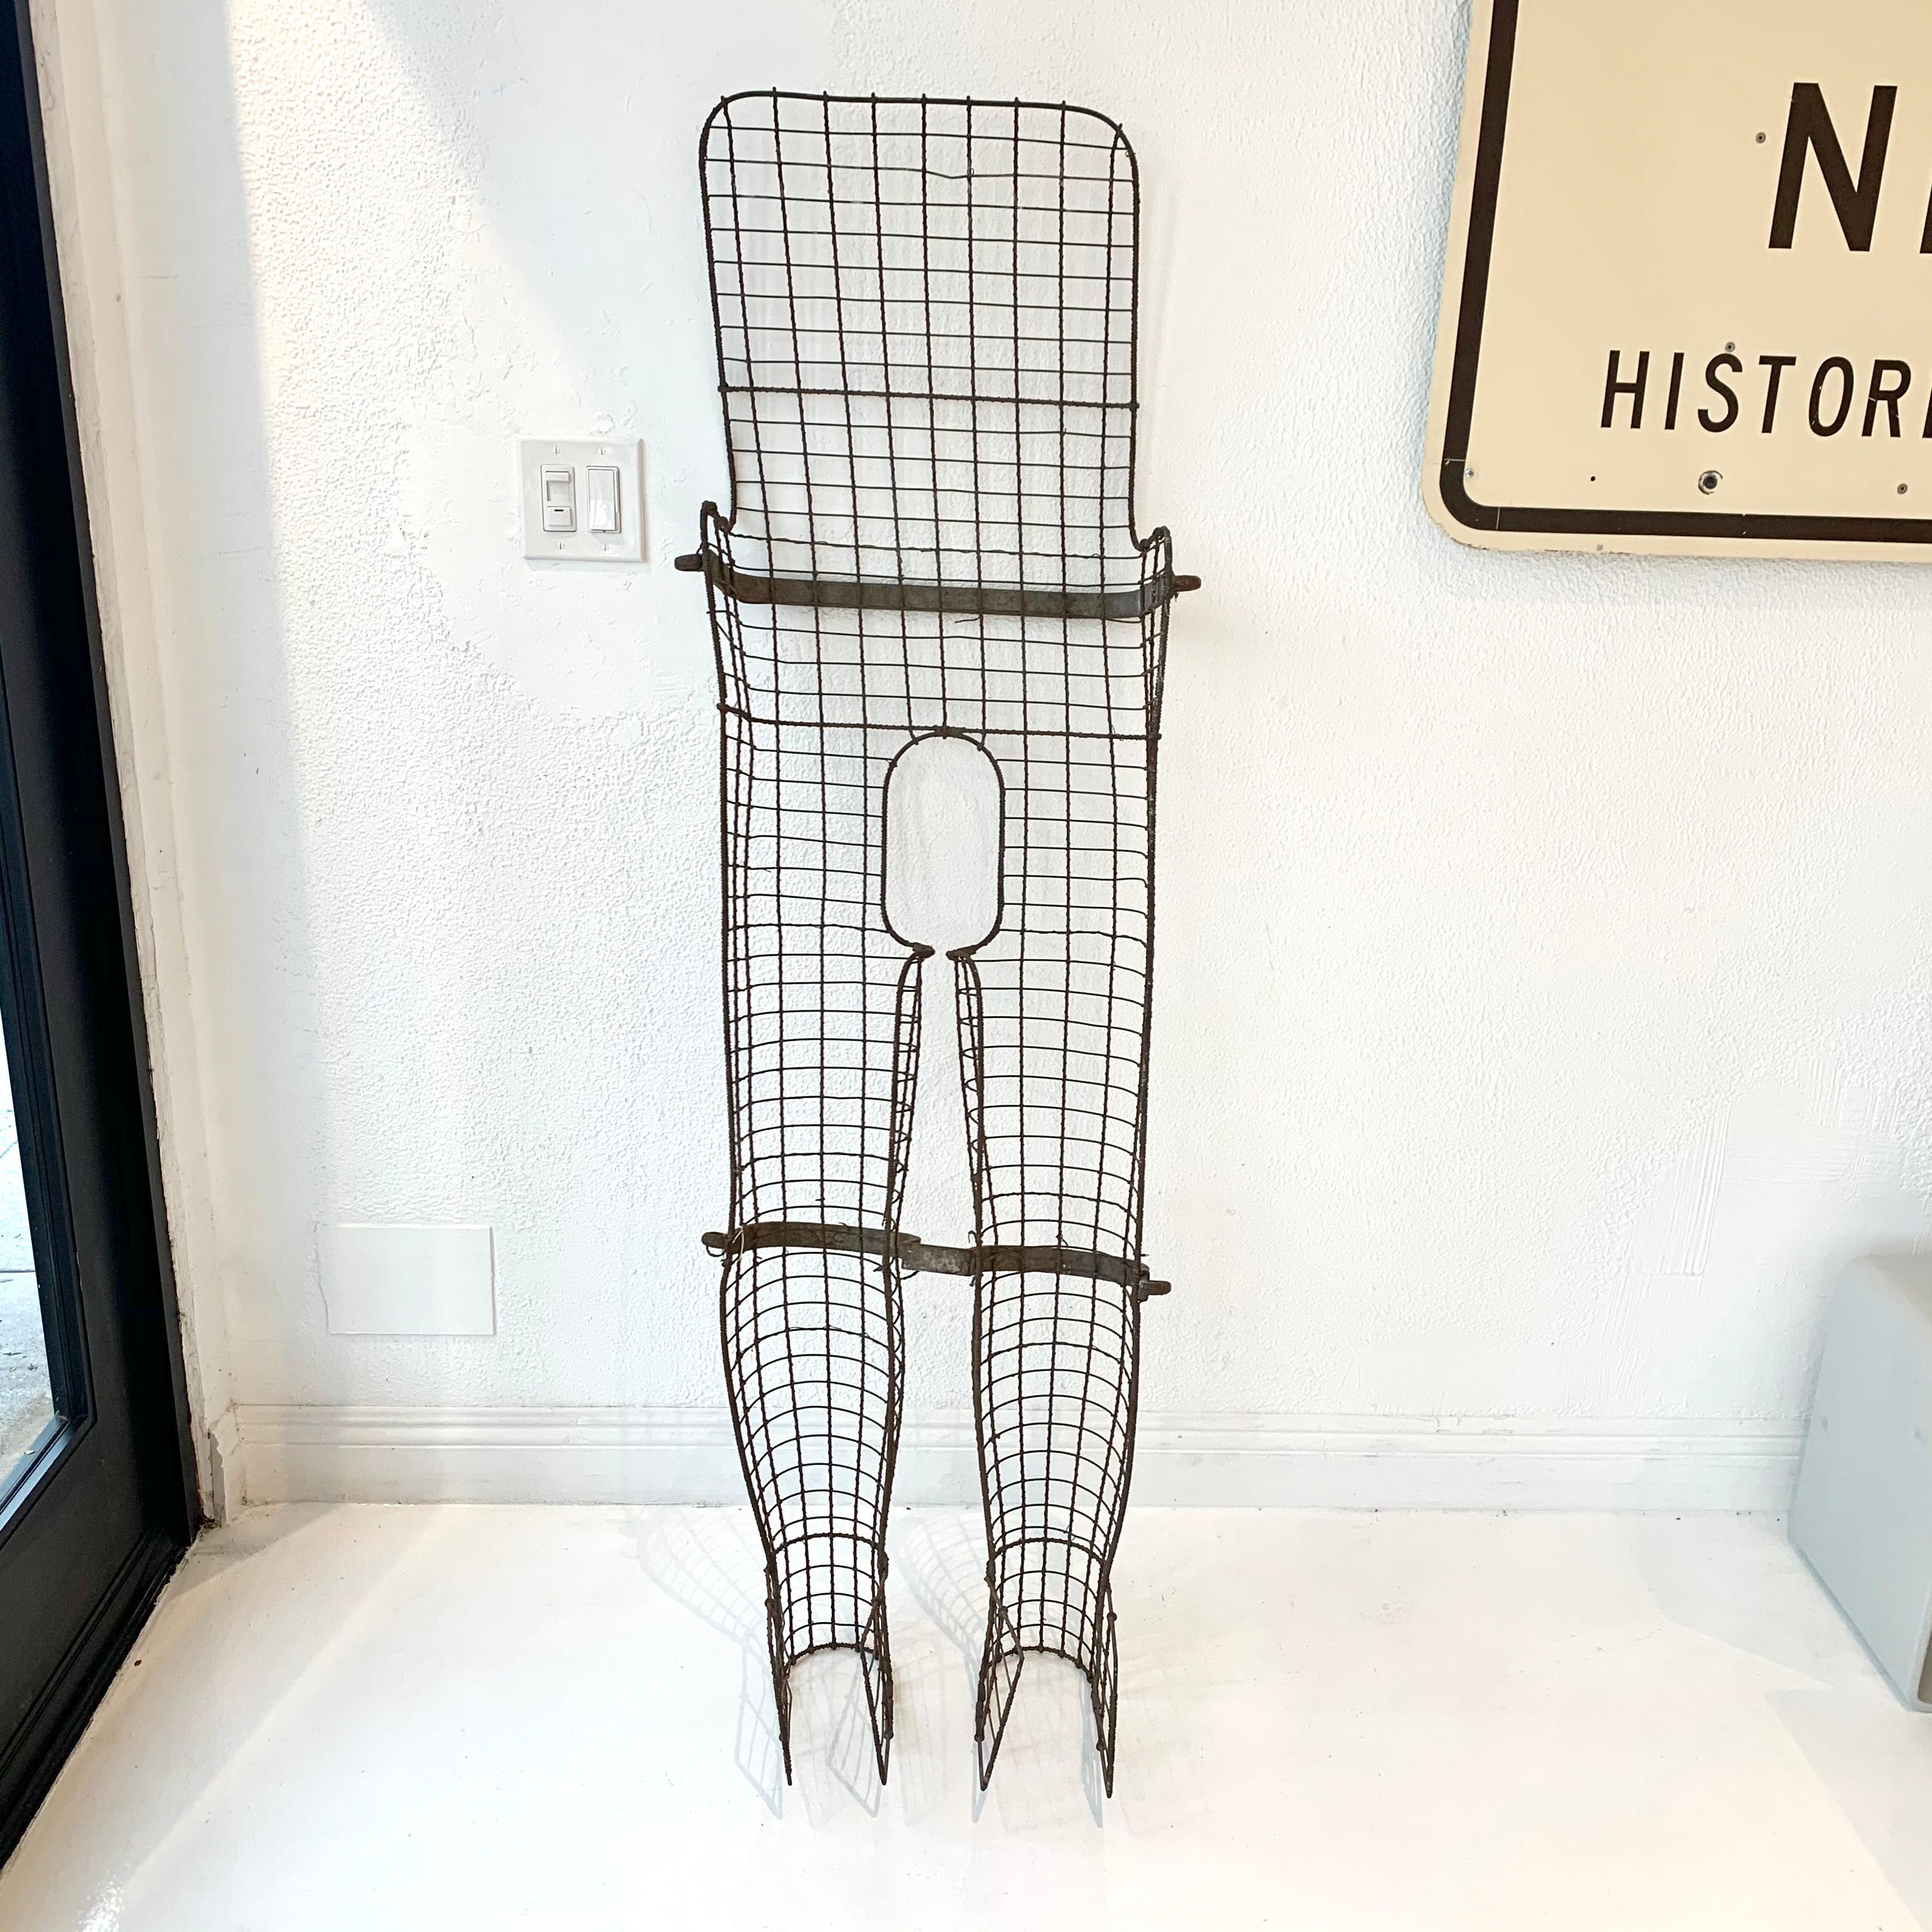 Unusual metal stretcher from the French Alps, circa 1960. Thick metal bars with wire frame. Great piece for a winter home. Good vintage condition.